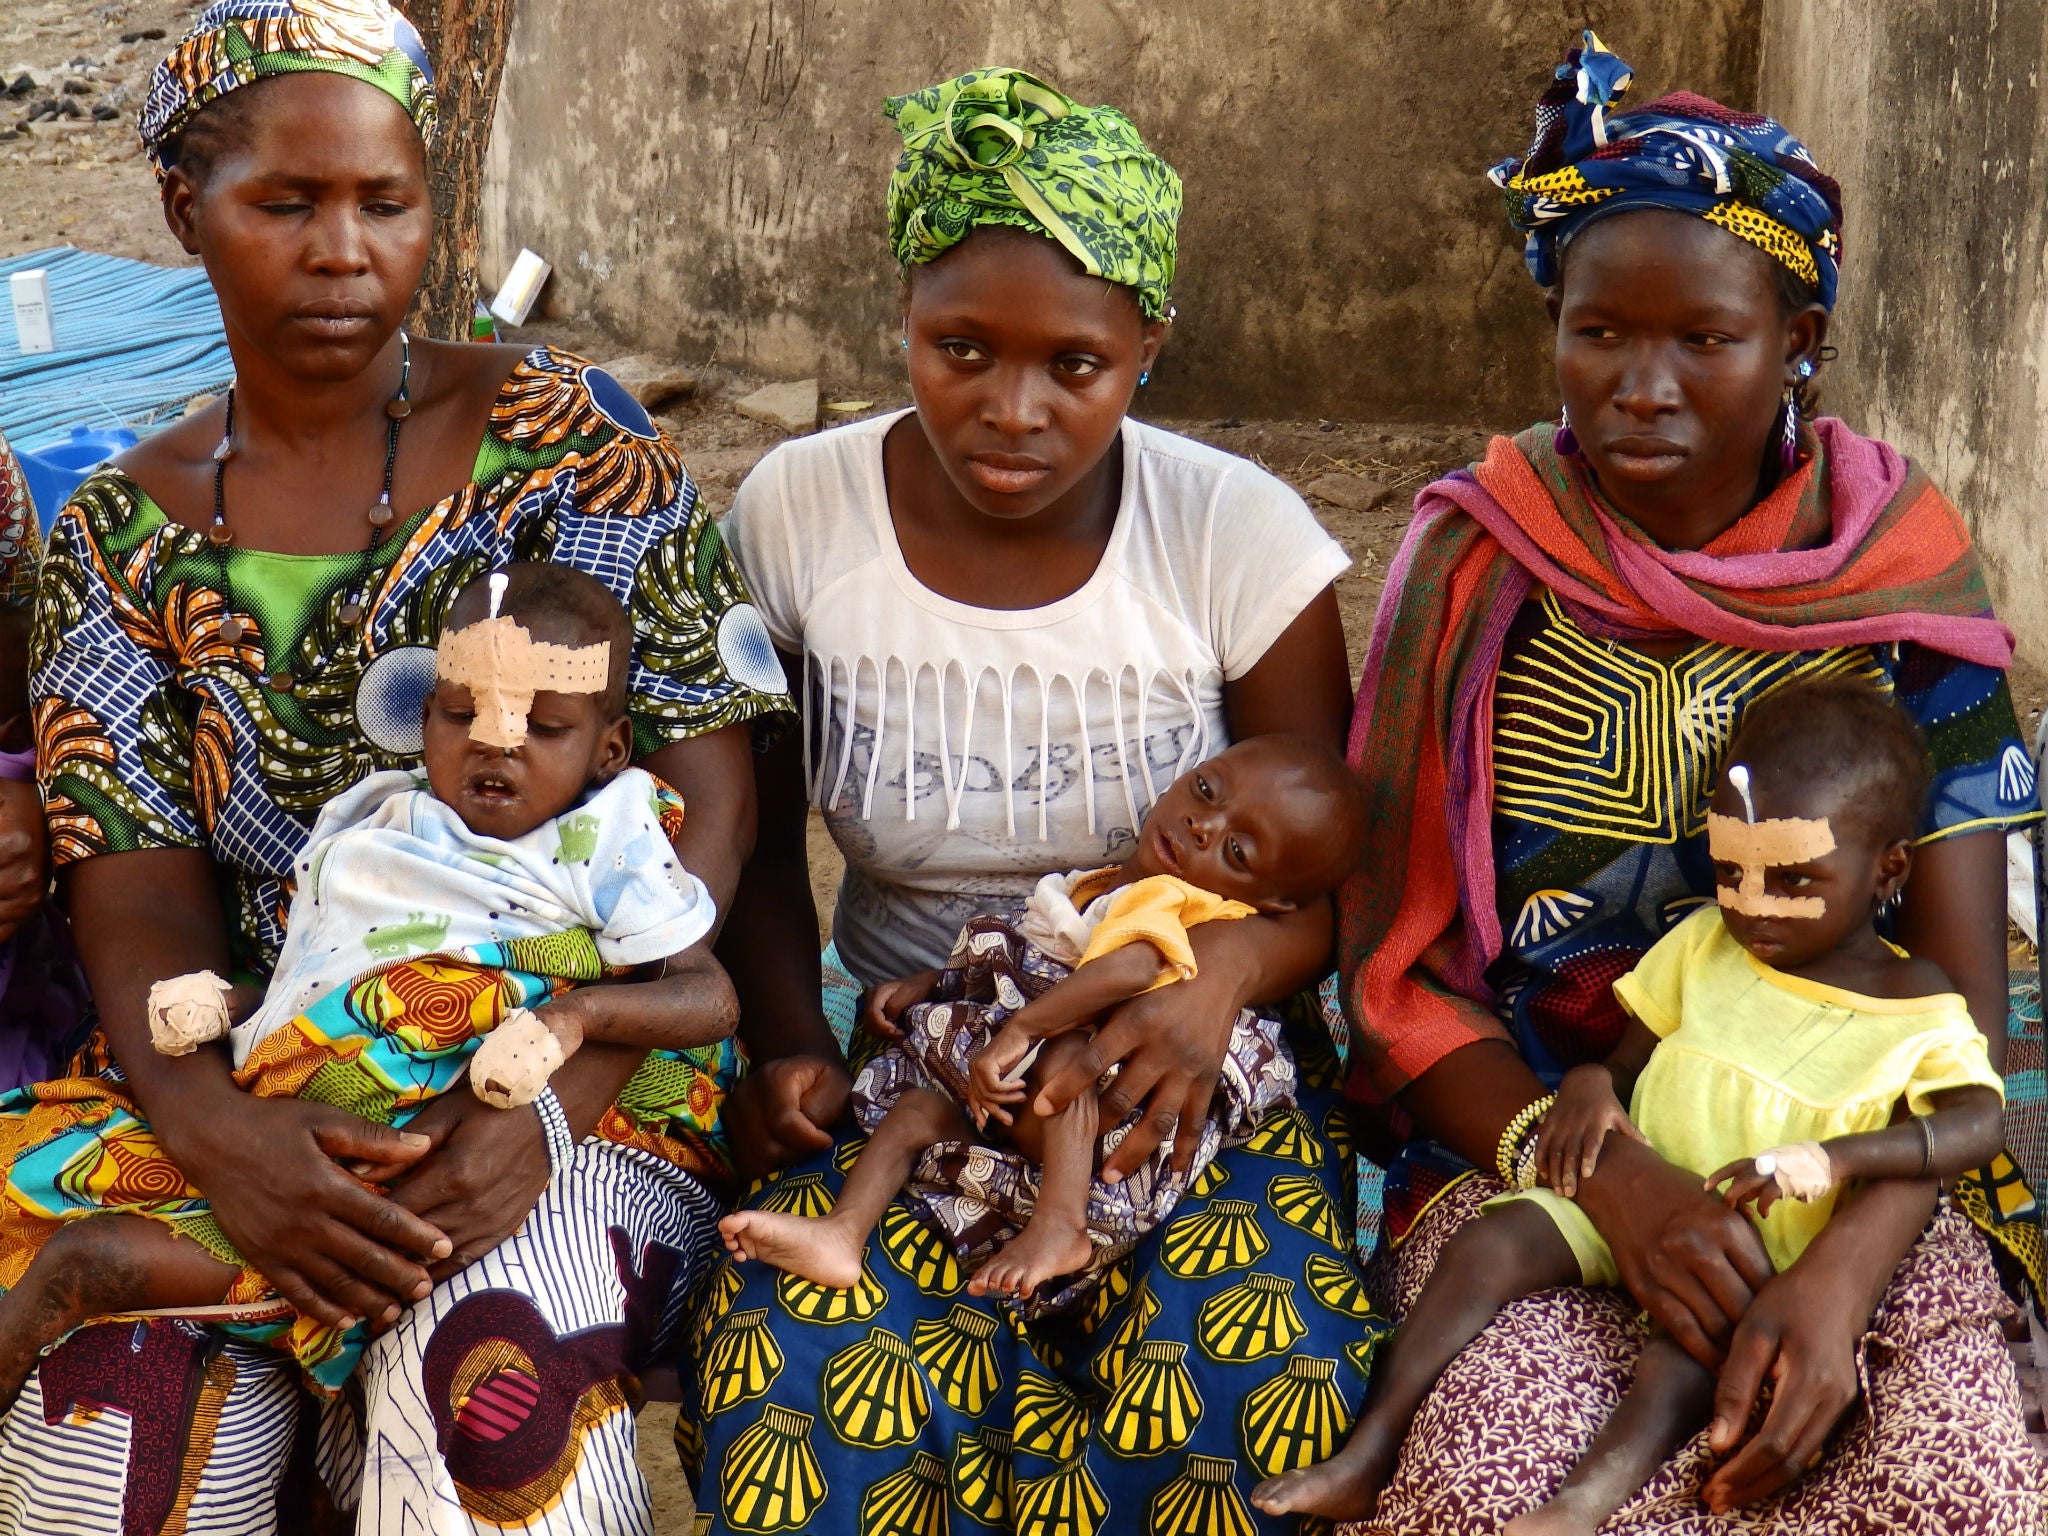 Mothers with children undergoing treatment for severe acute malnutrition at Kita Hospital, Kita, Mali on 14 March 2016